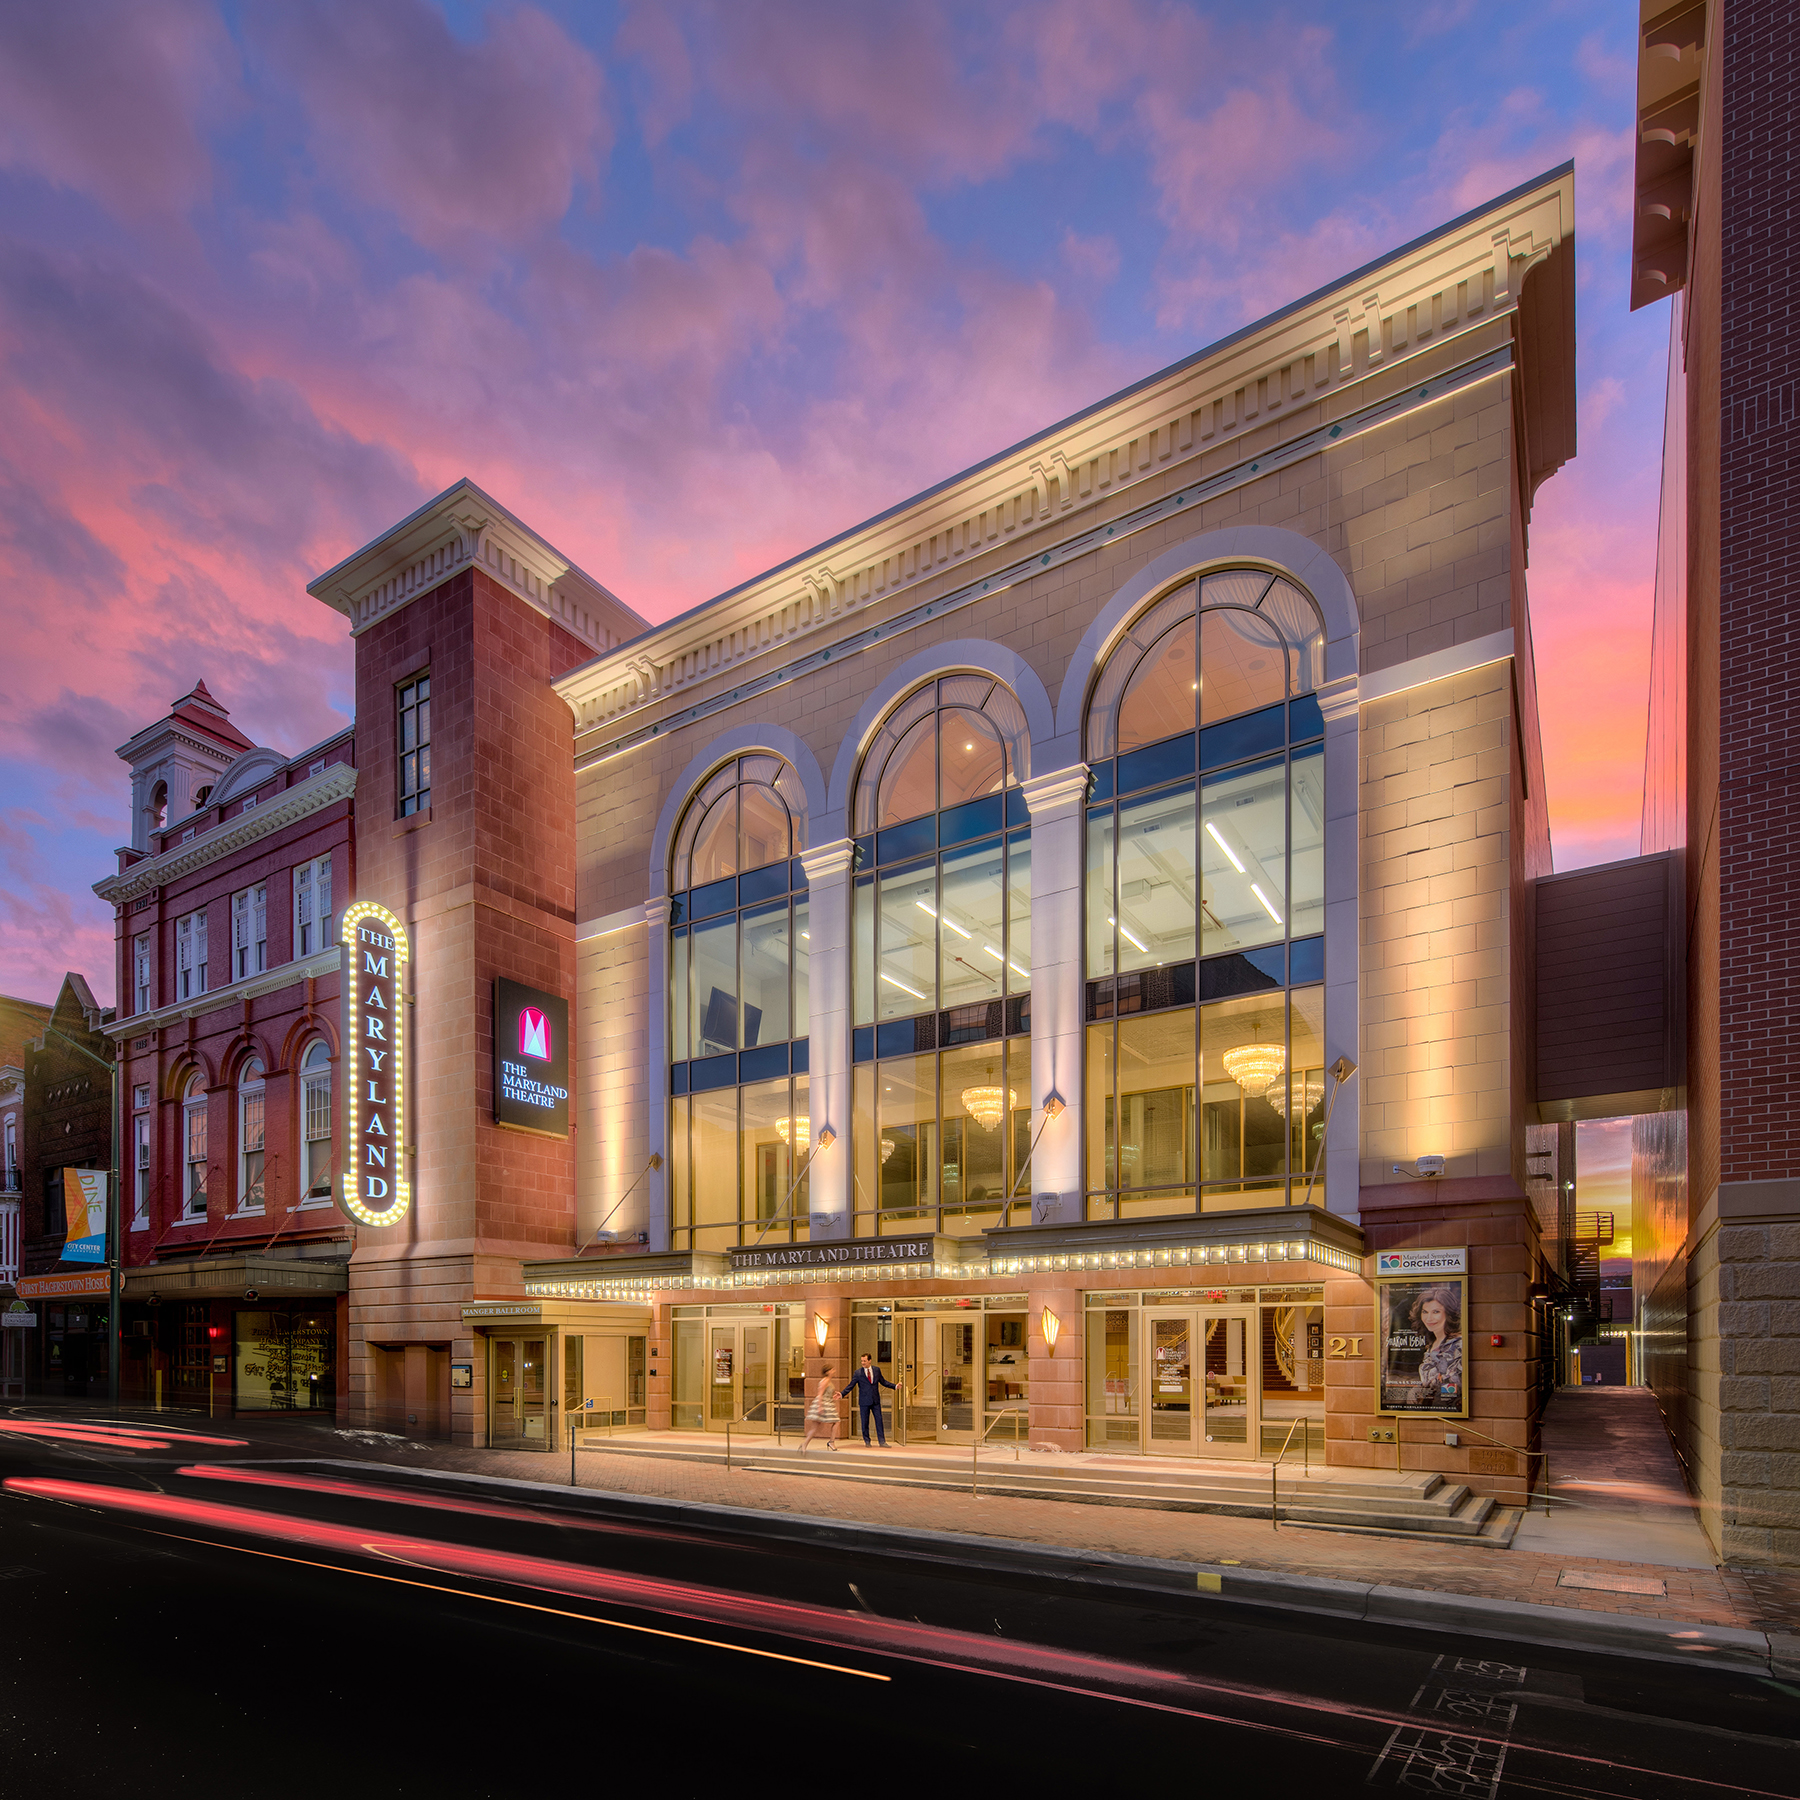 The Maryland Theatre addition exterior in Hagerstown